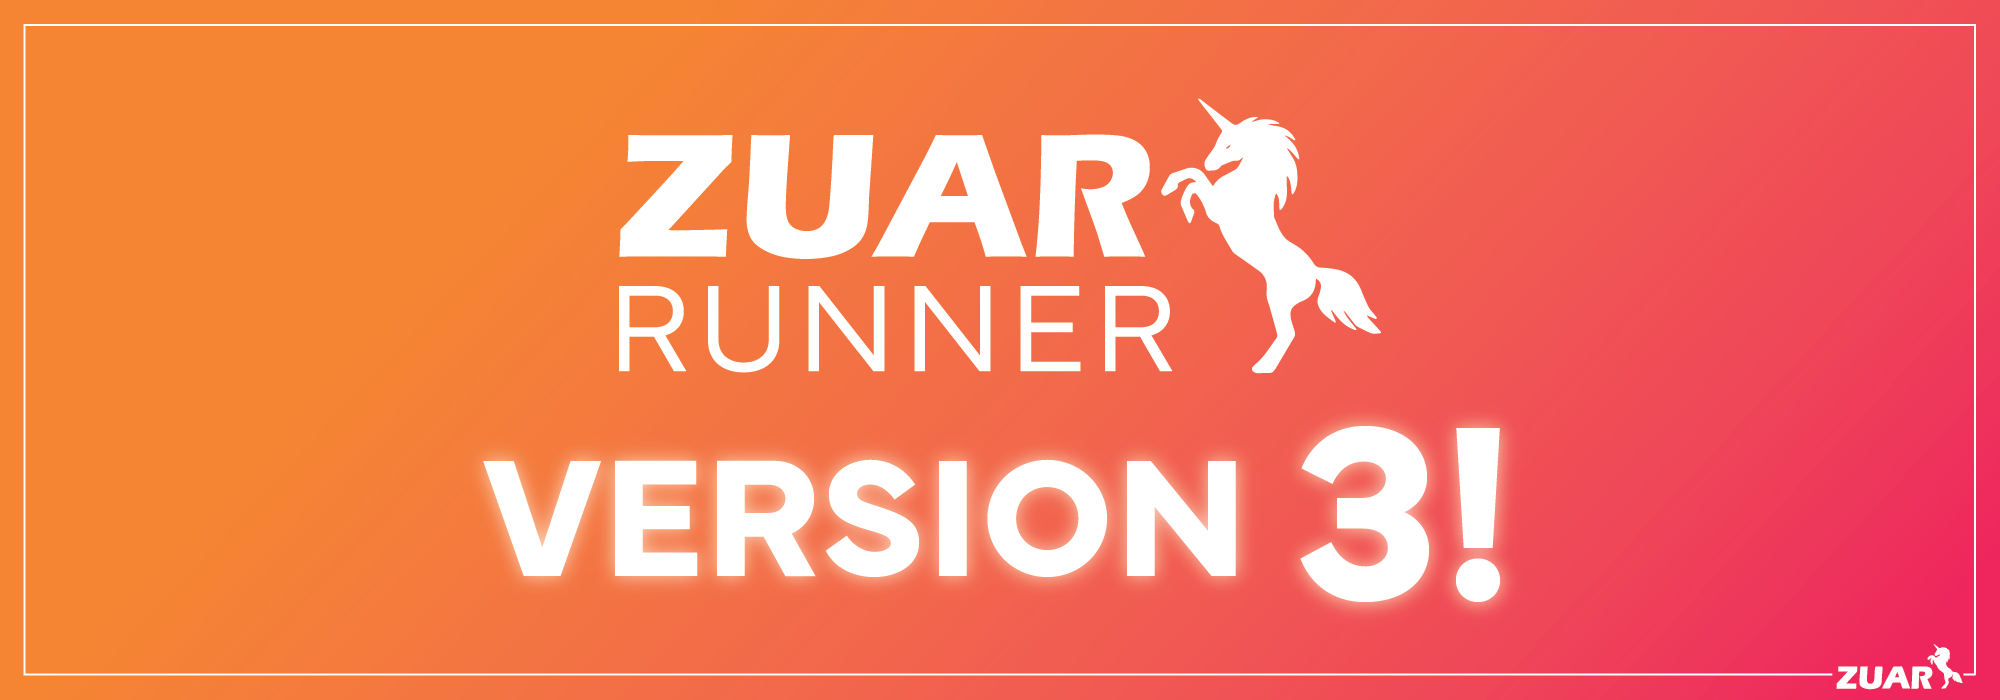 Zuar Runner Version 3 Launches, Provides Powerful Features to Data Professionals